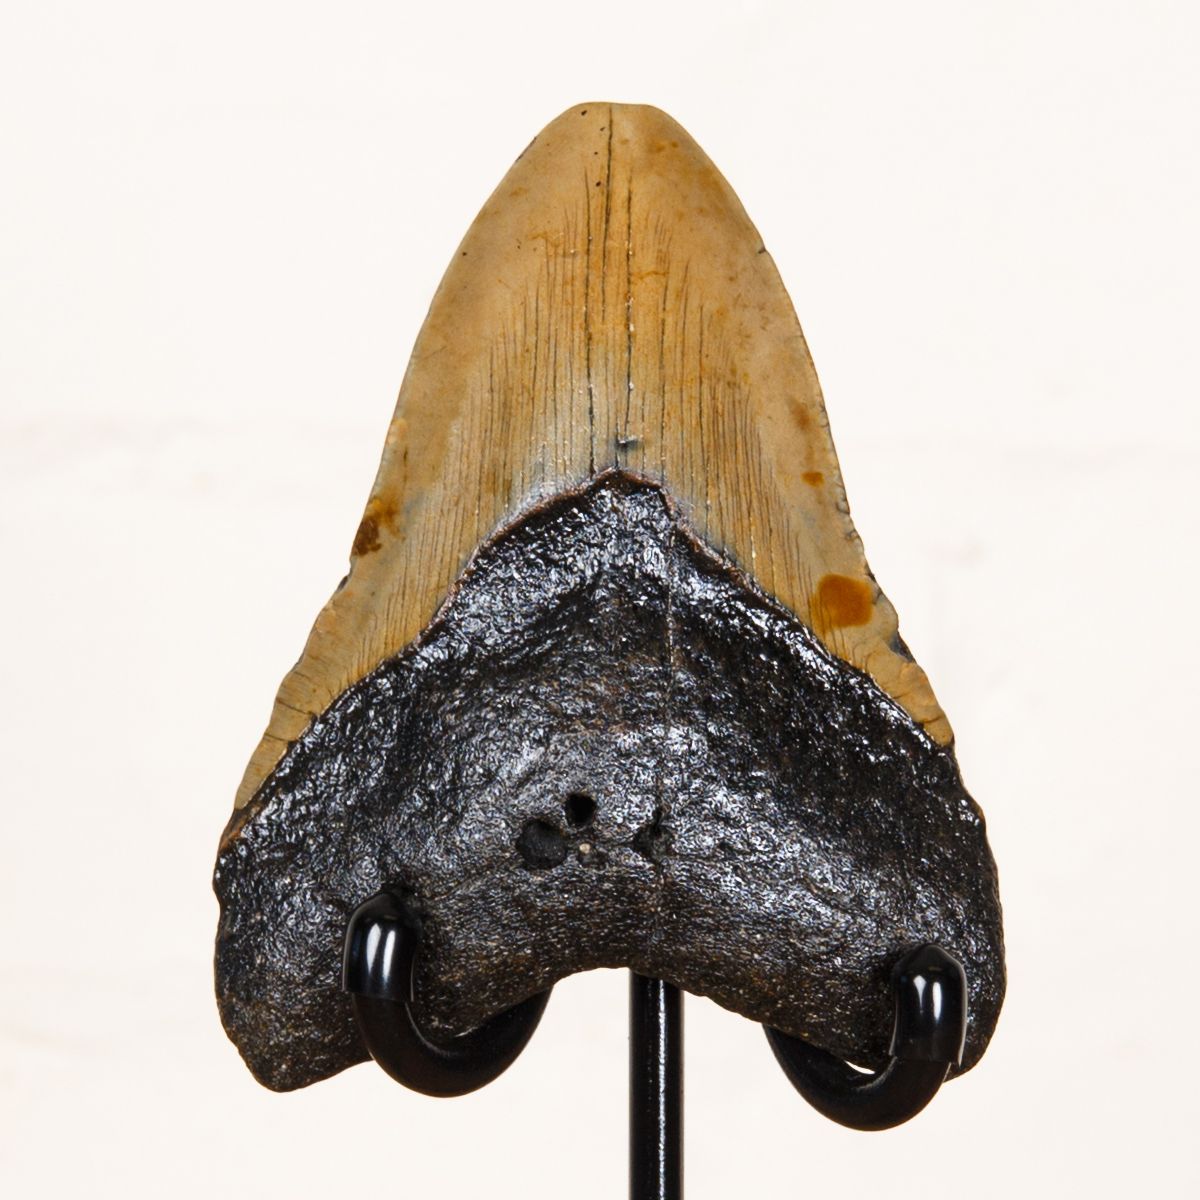 Huge 4.3 Inch Megalodon Shark Tooth Fossil on Stand (Carcharodon megalodon)